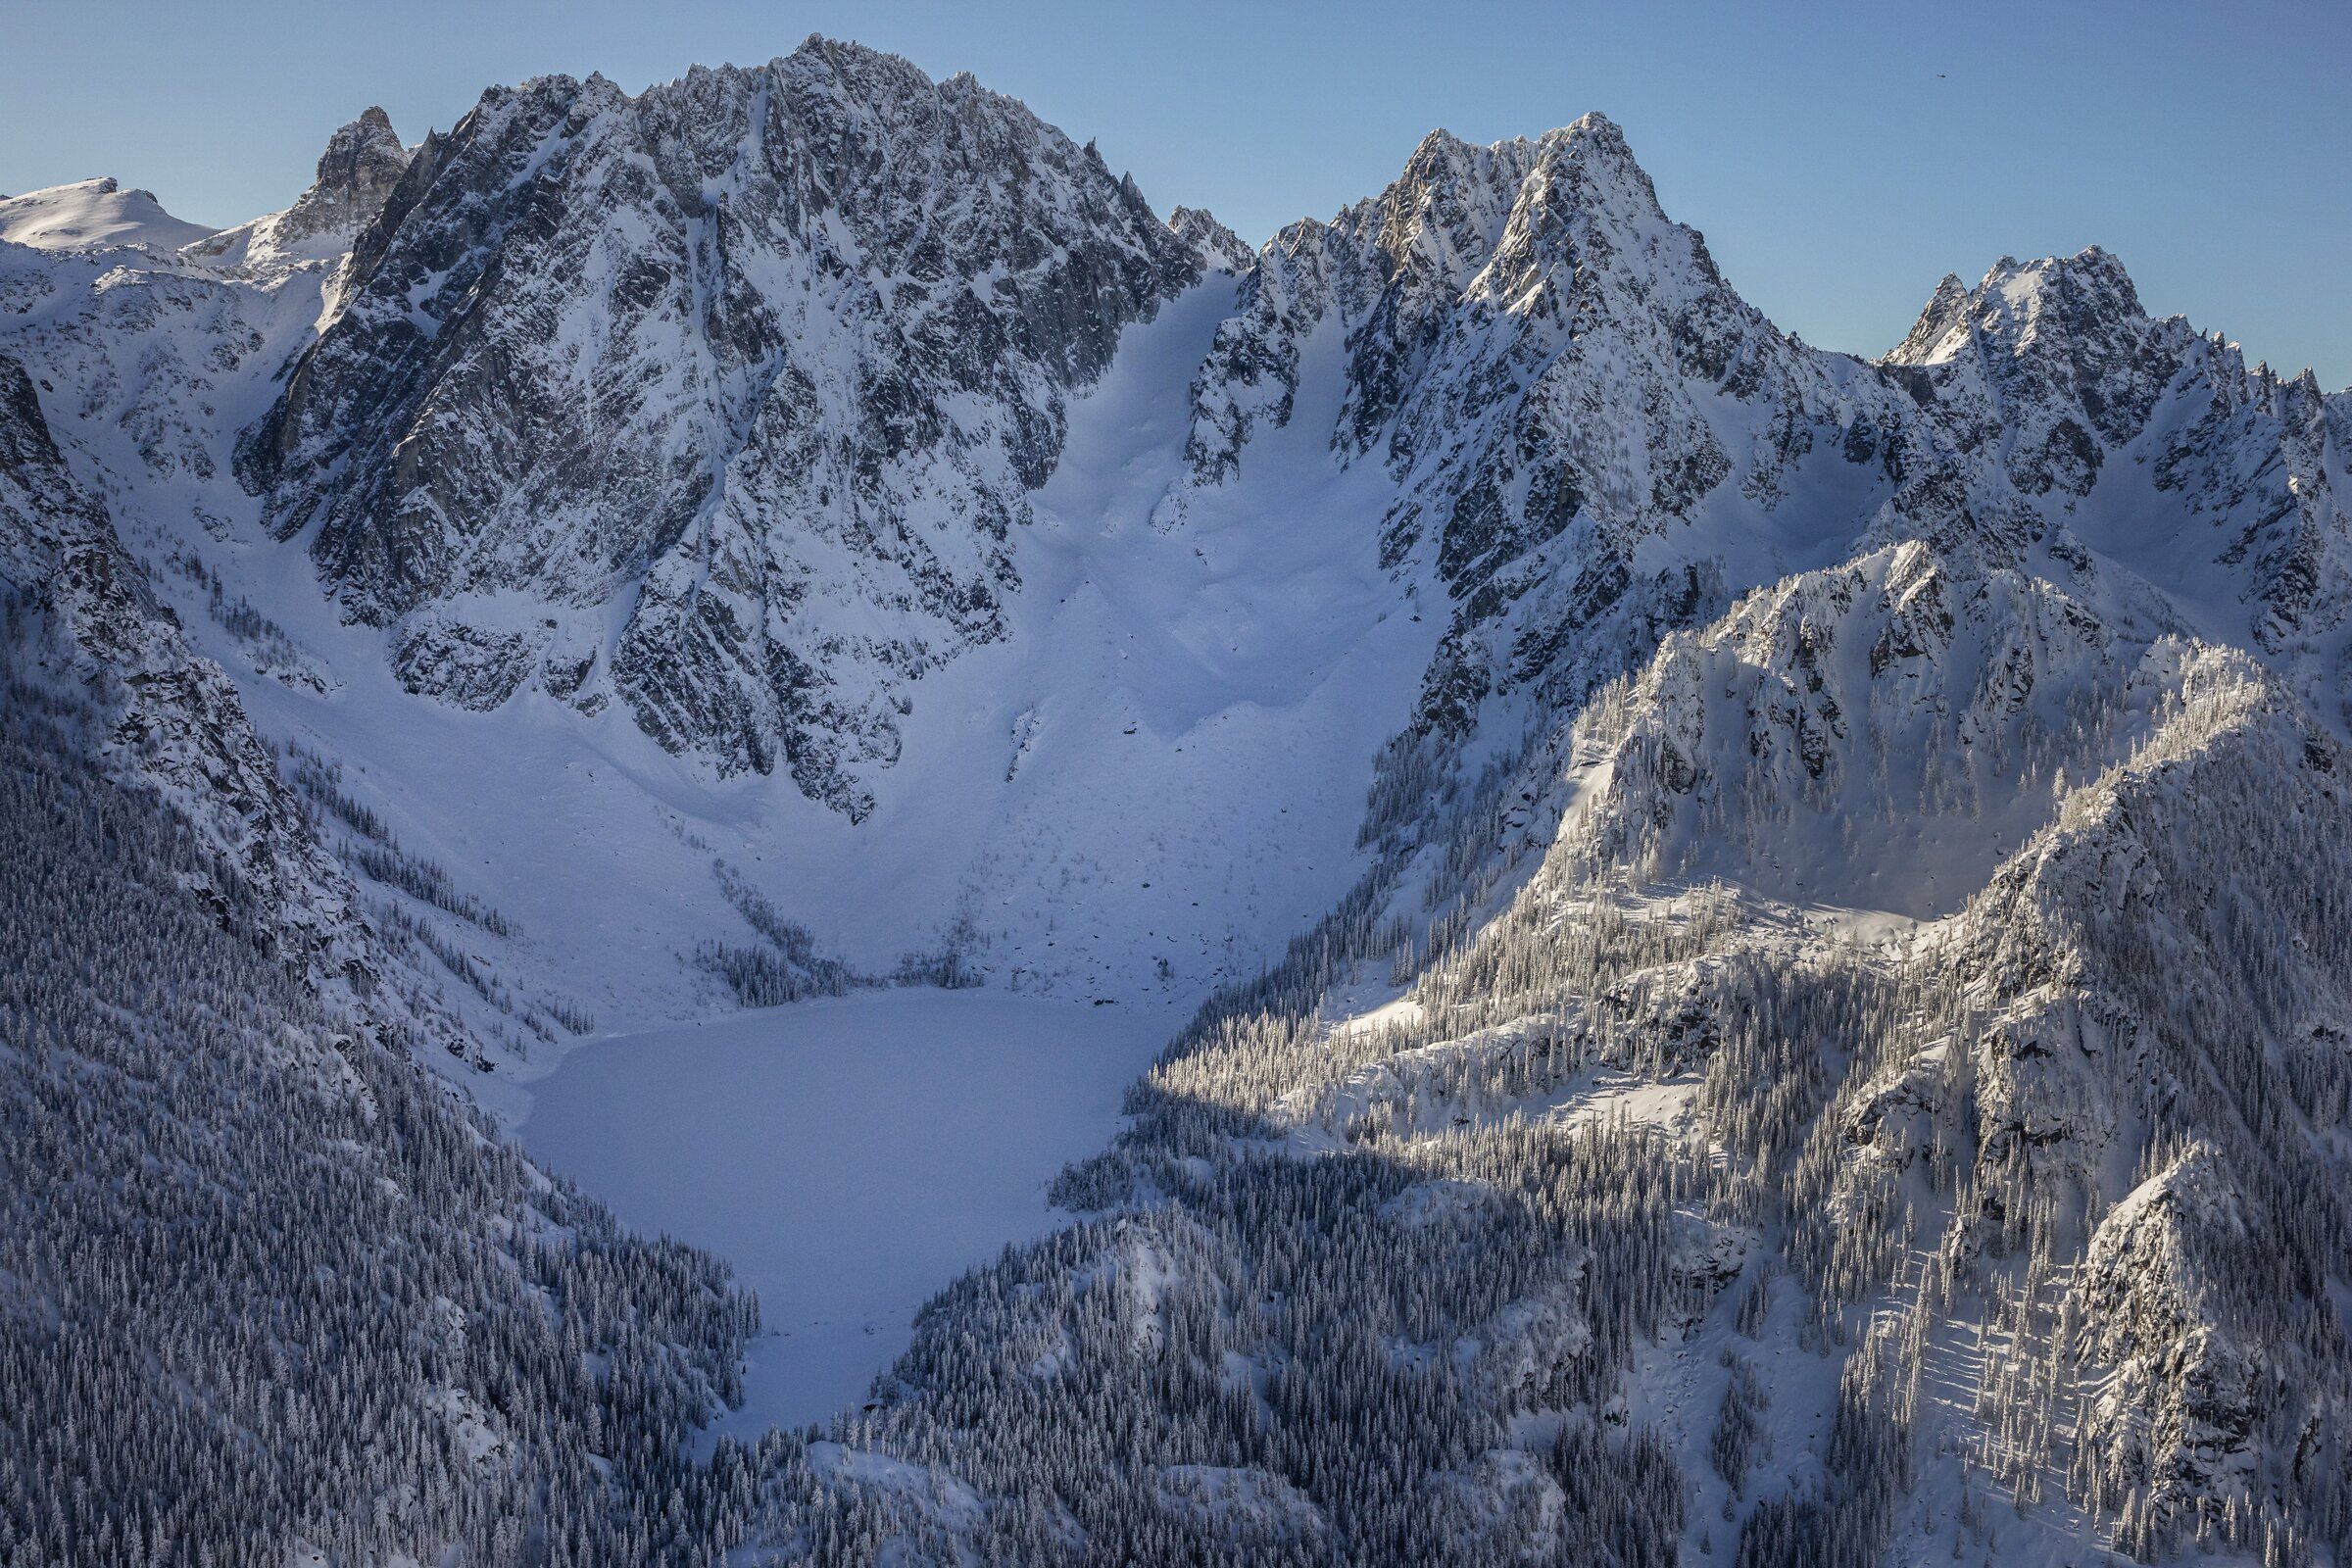 Small avalanche' killed 3 hikers at Colchuck Peak, final report